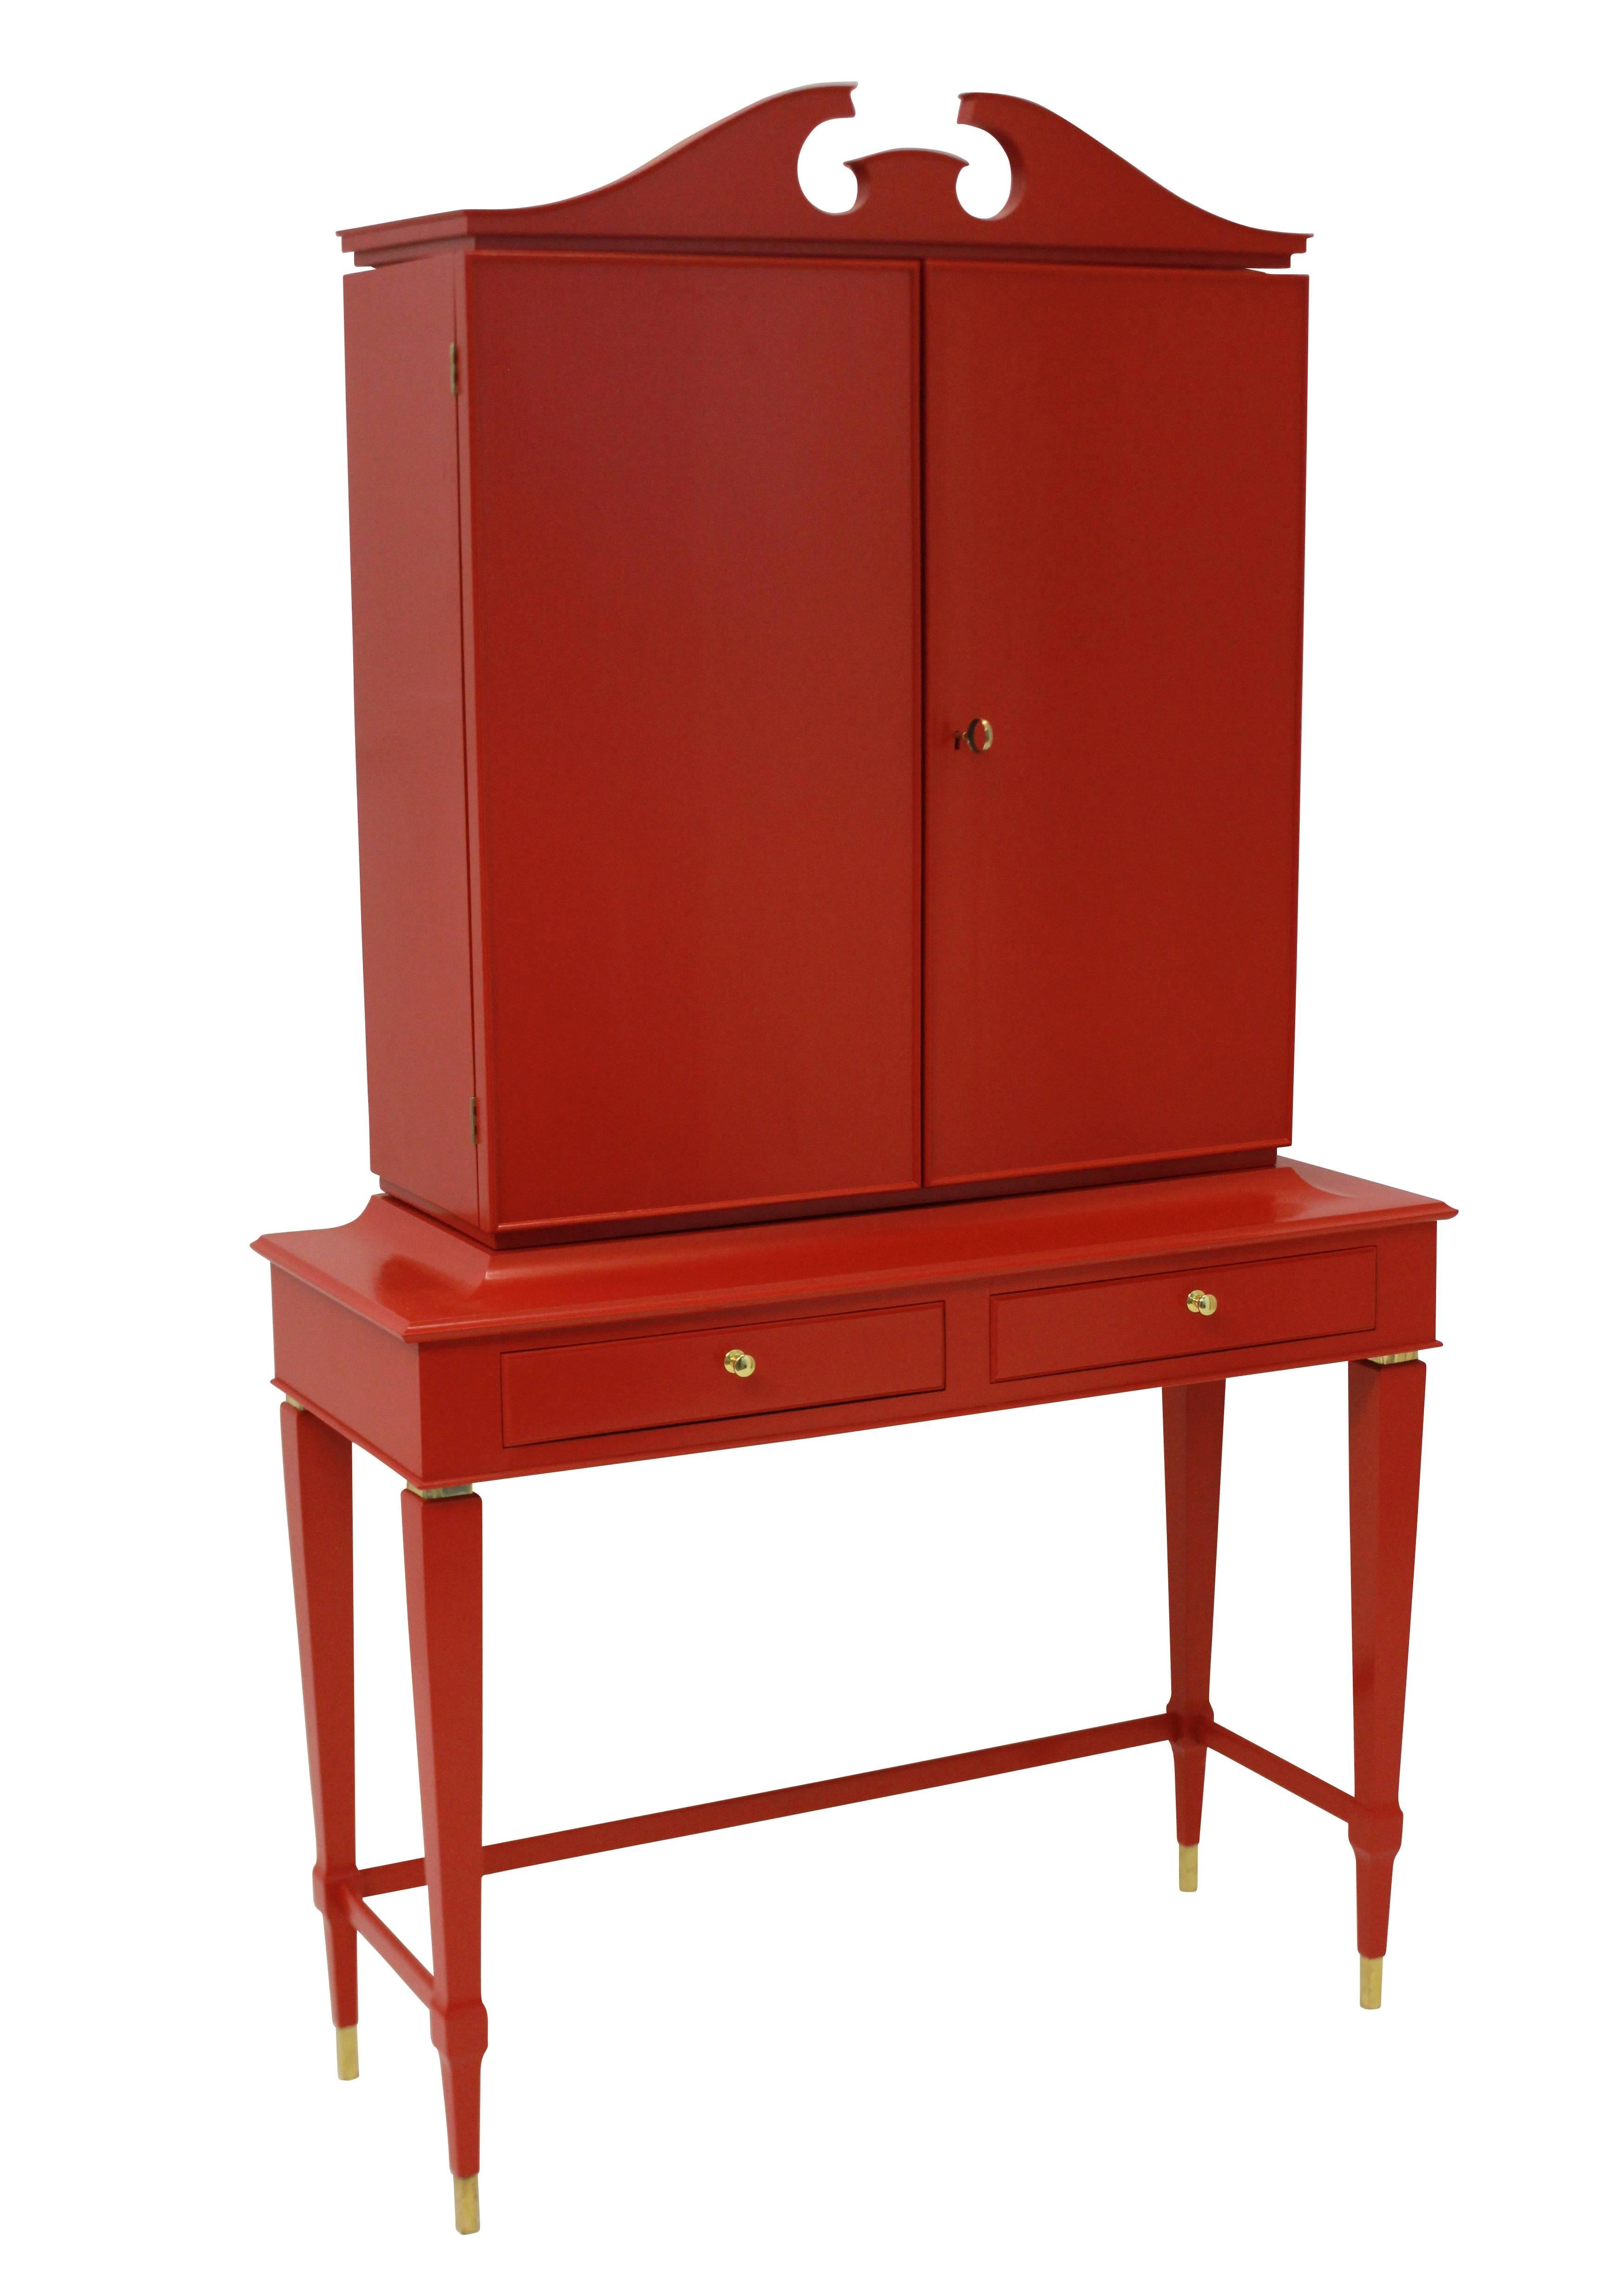 An Italian architectural bar cabinet of fine quality by Paolo Buffa. In red lacquered rosewood, with a fitted interior, and two frieze drawers.